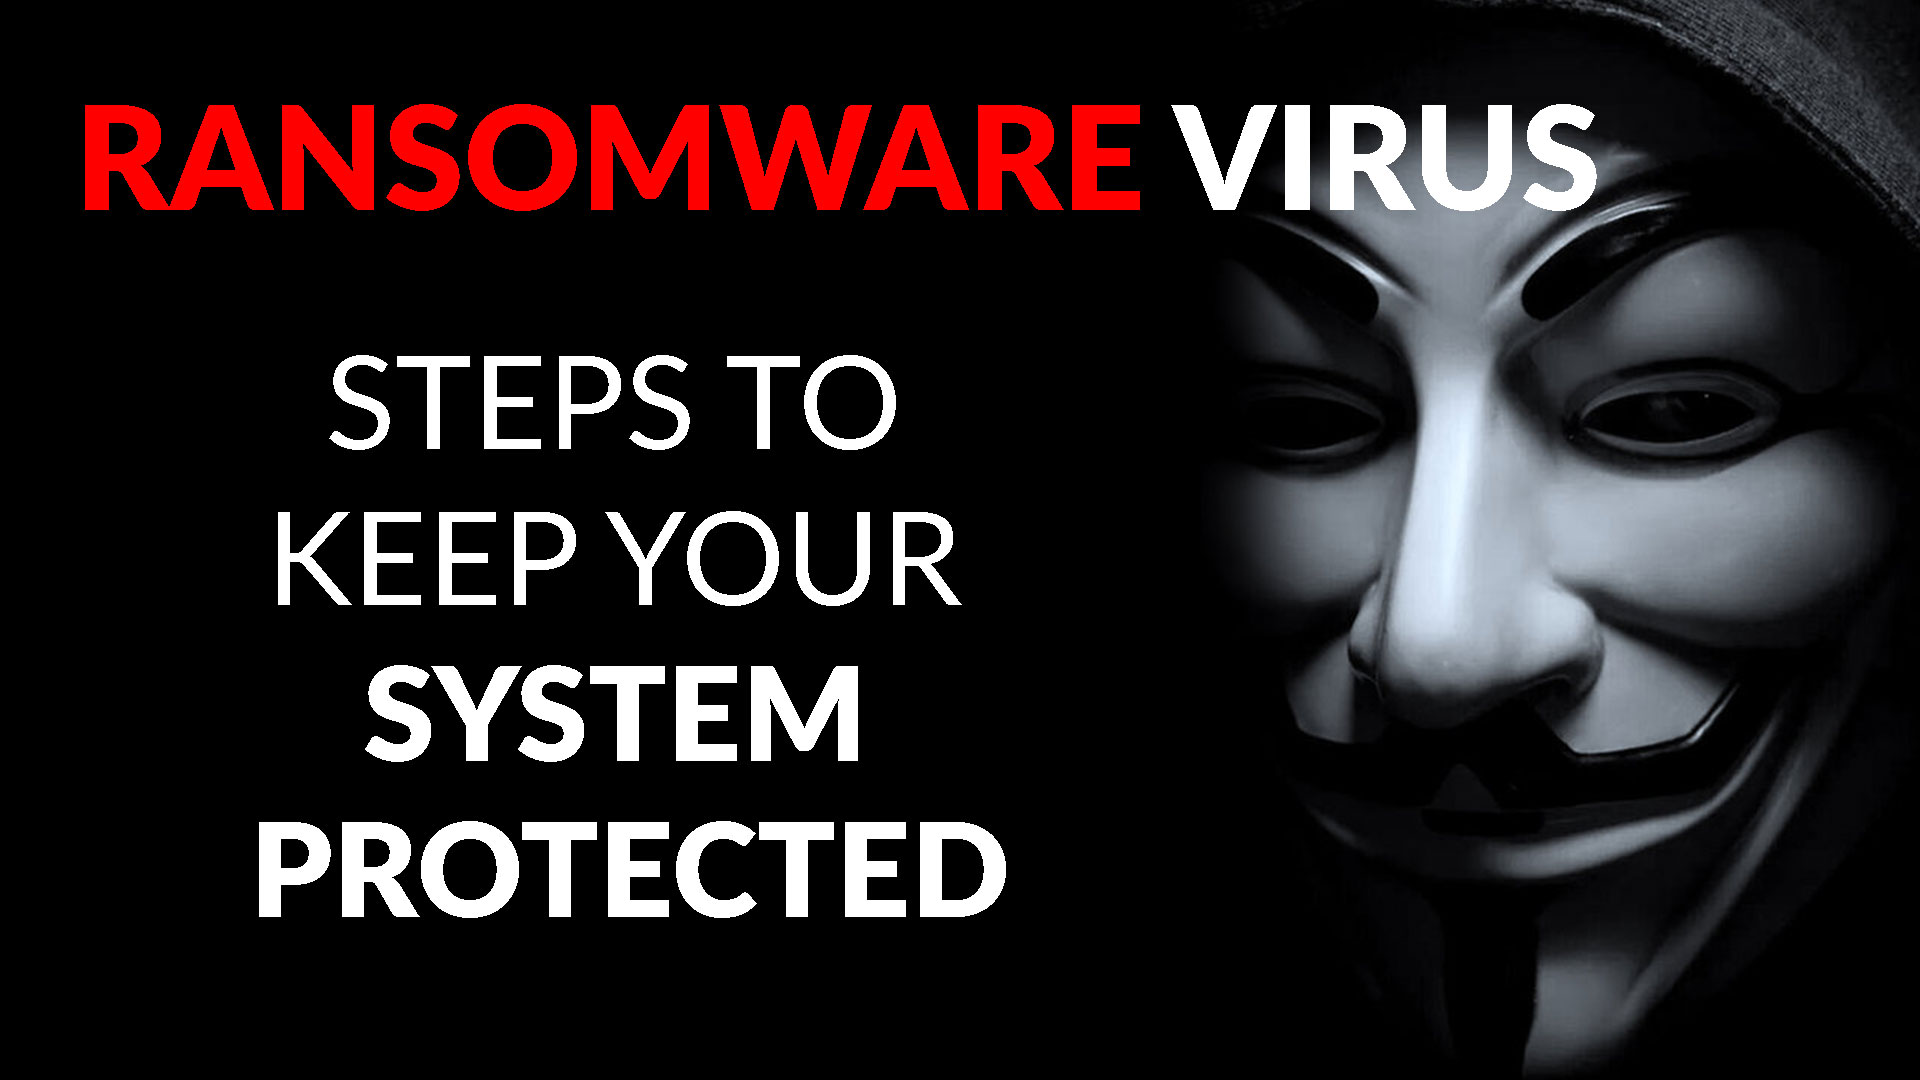 What Is Ransomware Virus Steps To Keep Your System Protected